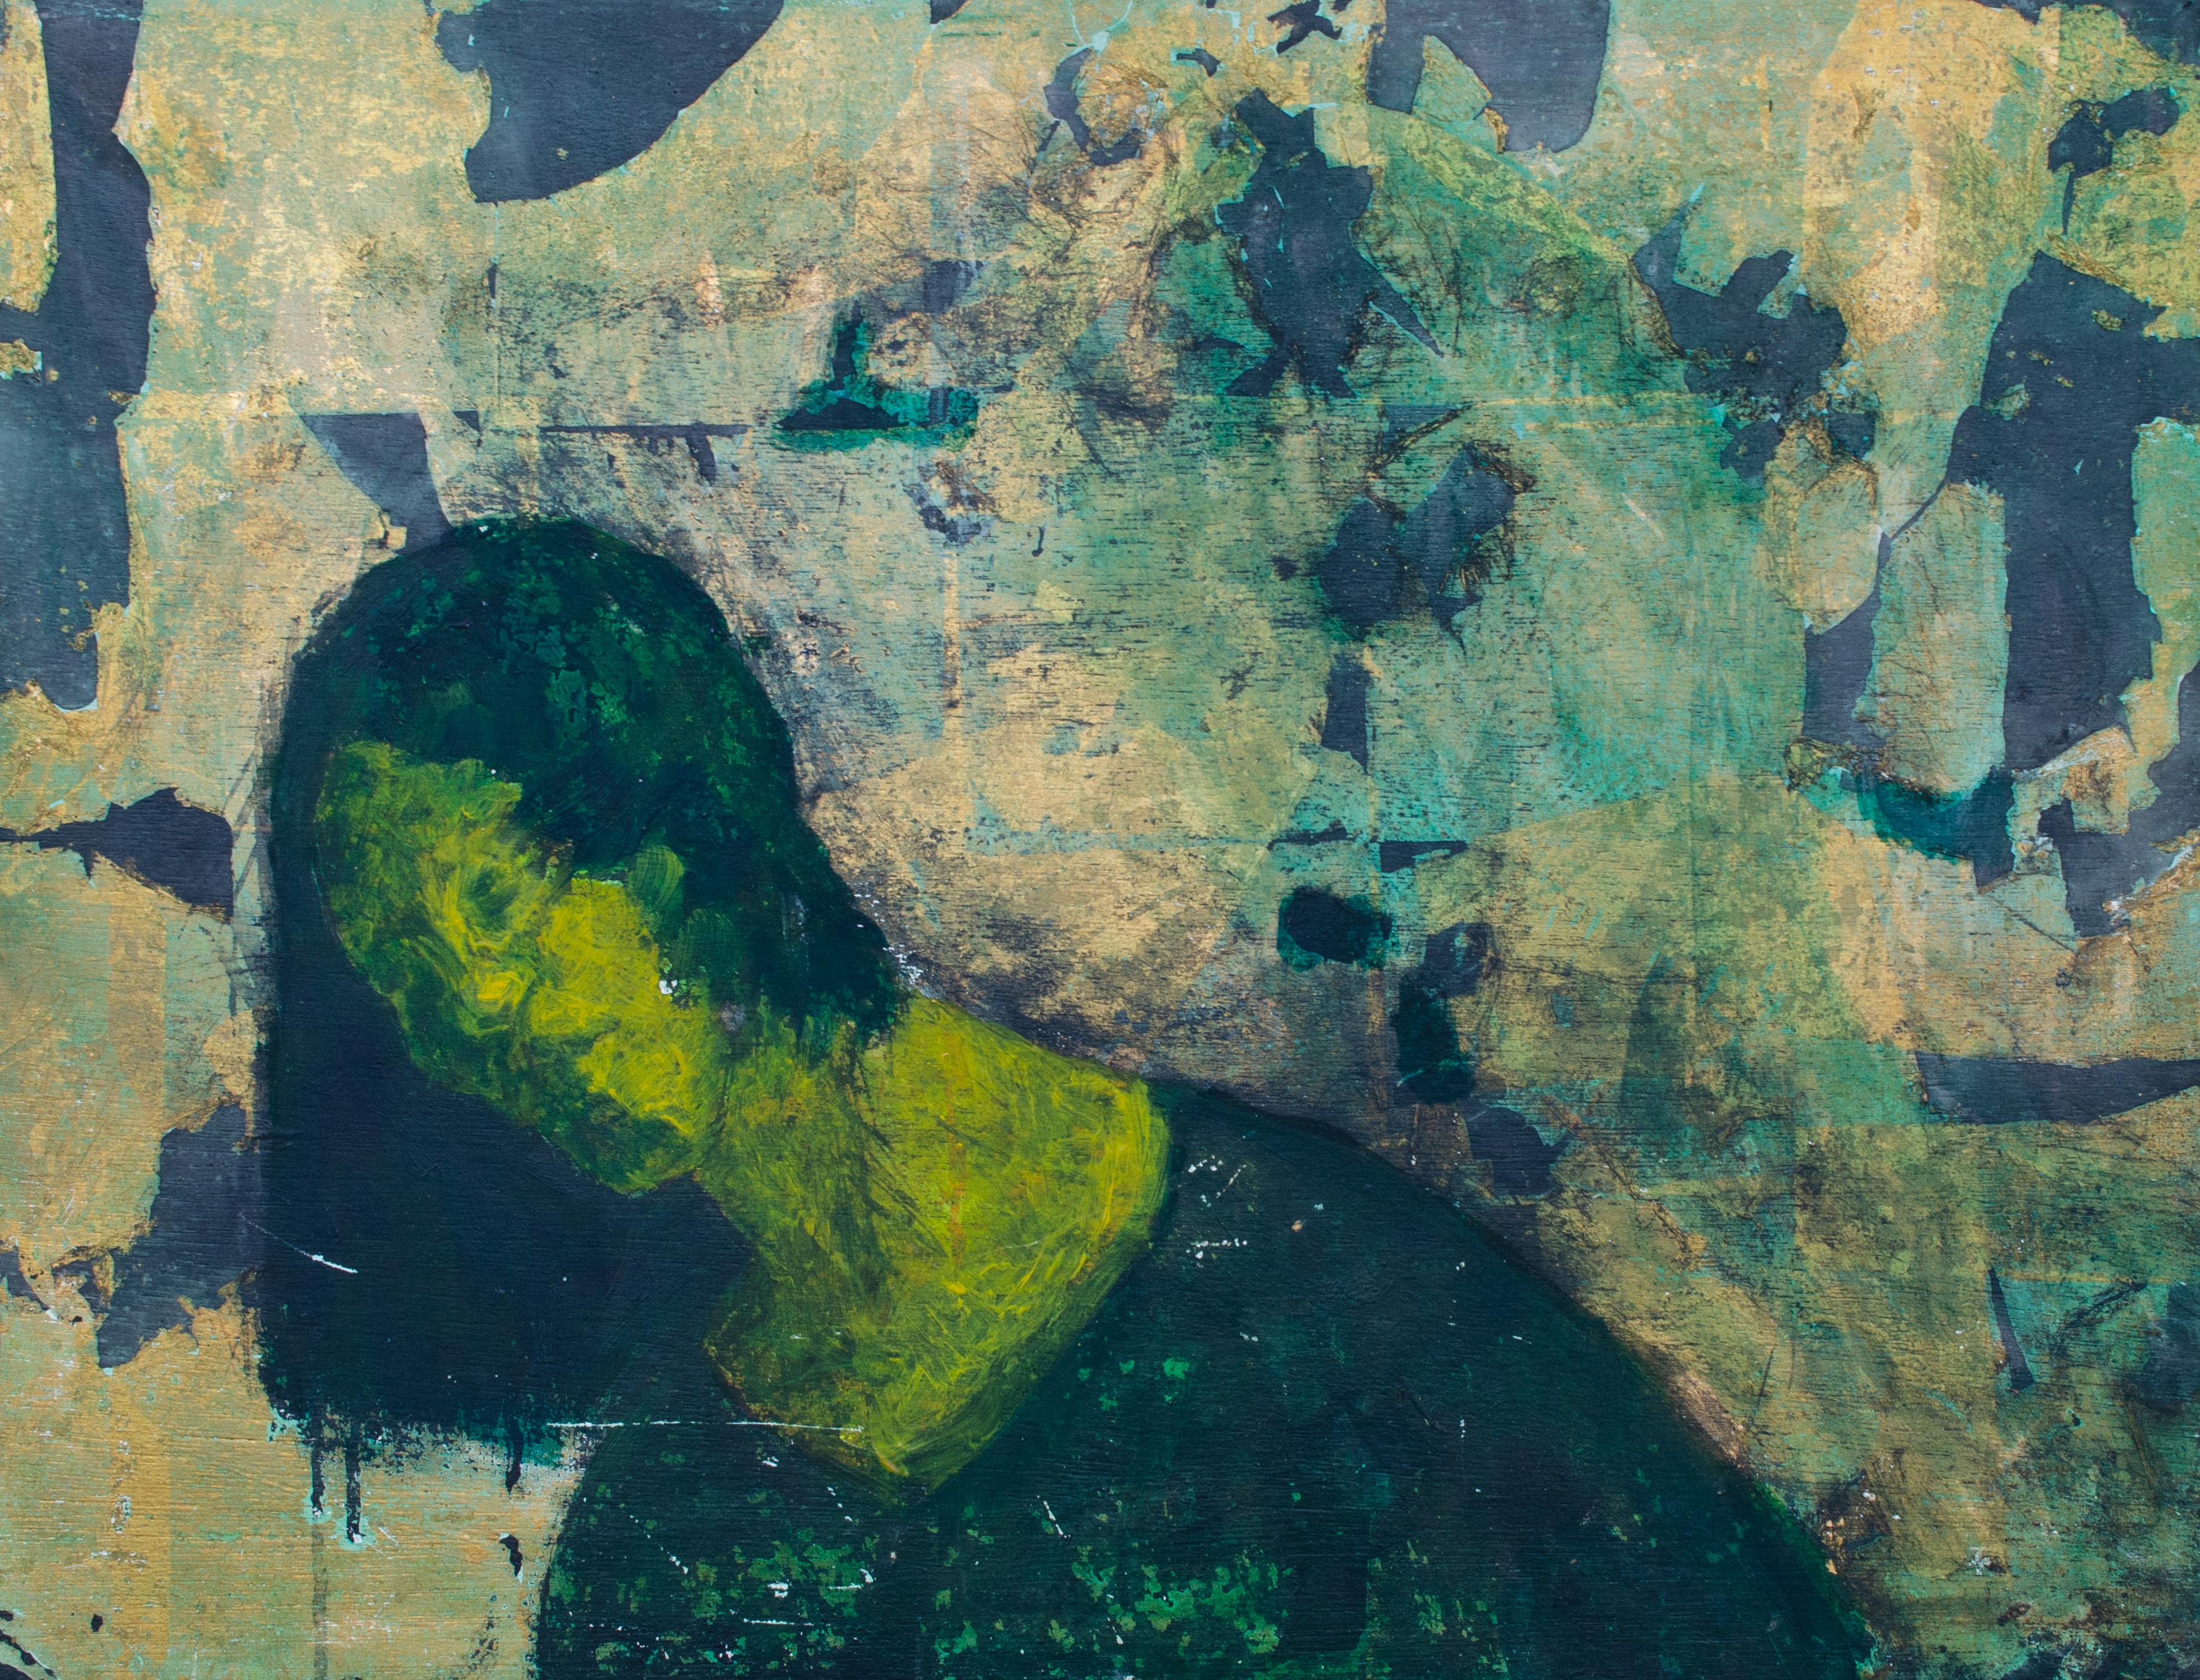 Green Goddess by Mystery Japanese Artist - Mixed Media Art by Unknown